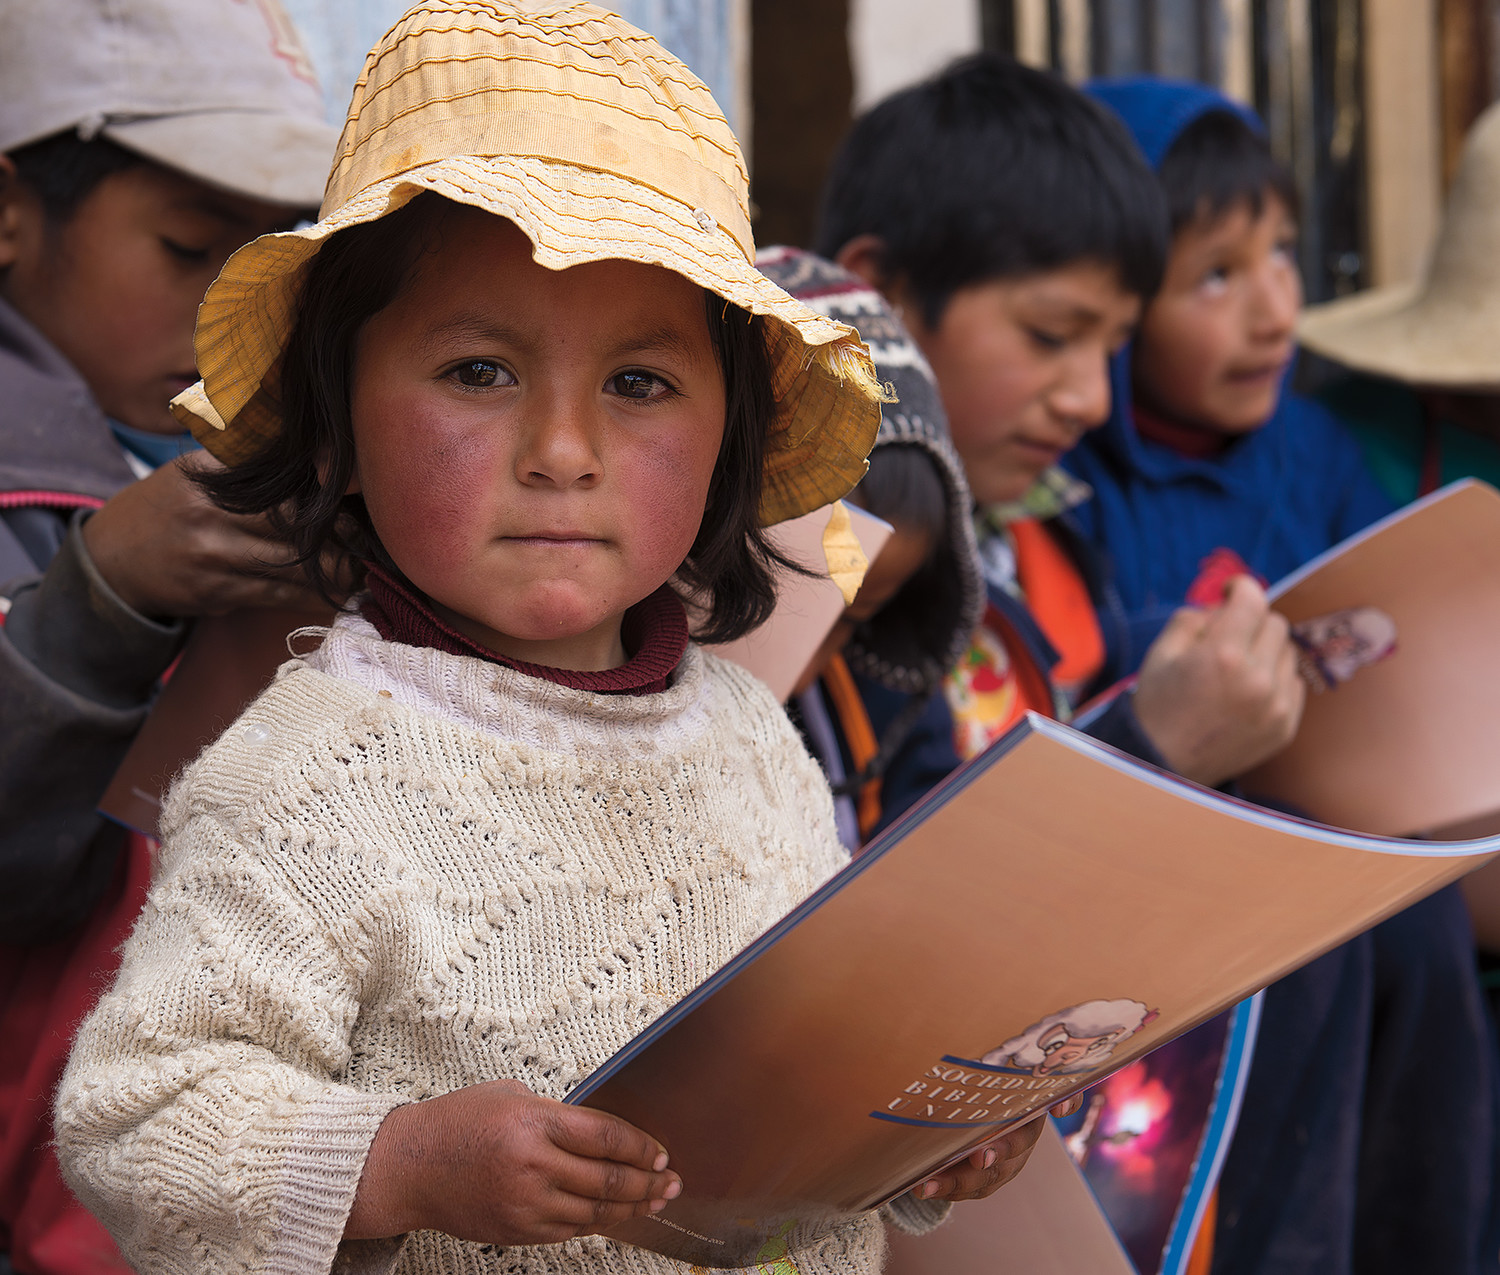 Building Up Believers in South Peru